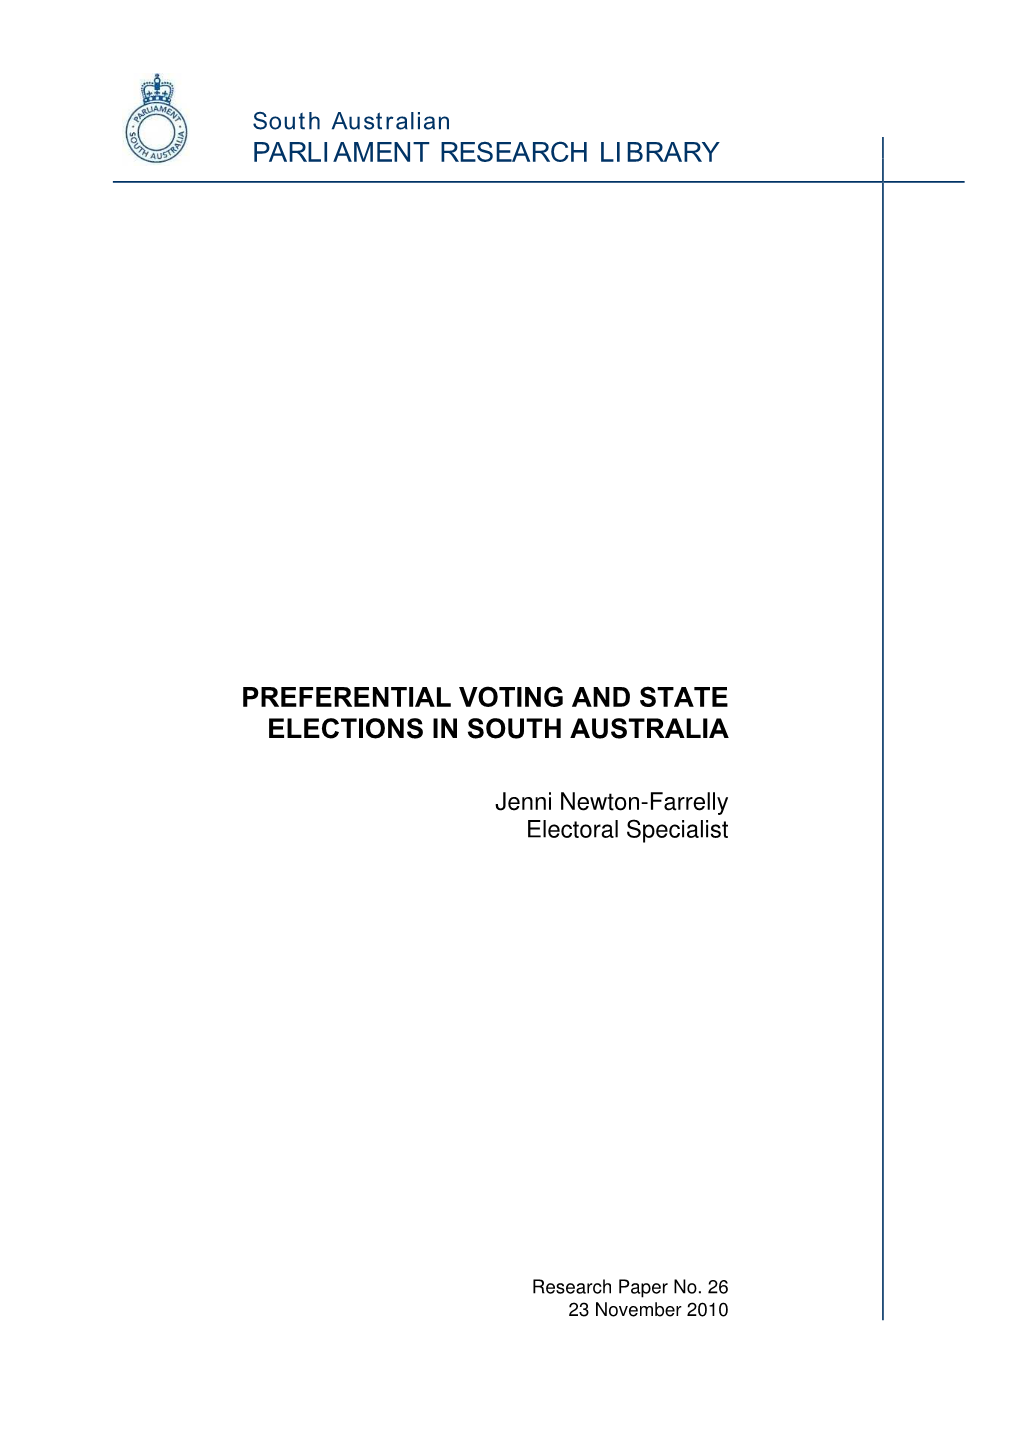 Parliament Research Library Preferential Voting And